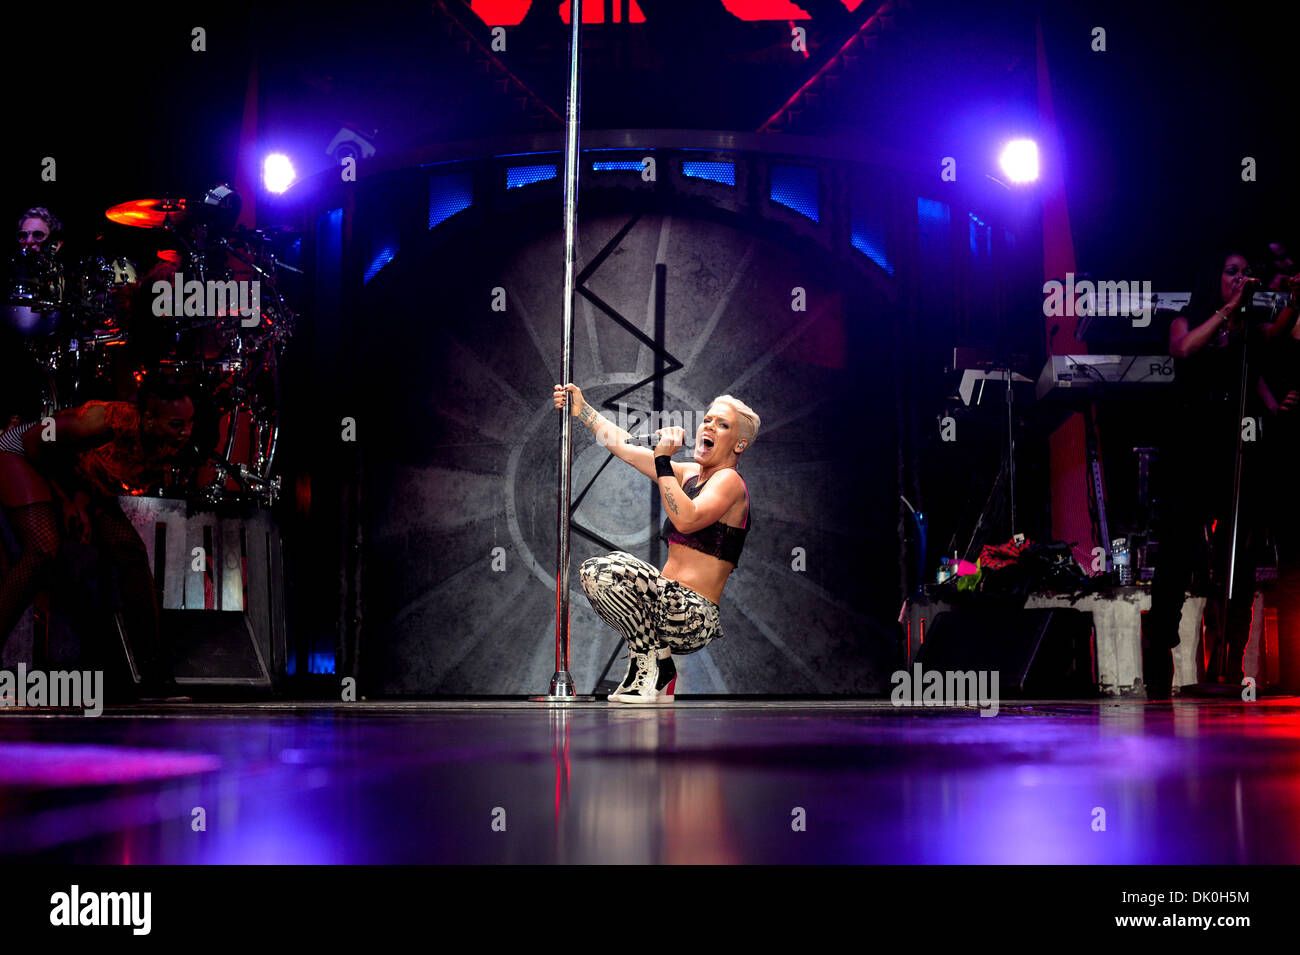 Toronto, Ontario, Canada. 30th Nov, 2013. American singer-songwriter and actress PINK (stylized as P!nk) performed at Air Canada Centre in Toronto as a part of her 'Truth About Love' tour. Credit:  Igor Vidyashev/ZUMAPRESS.com/Alamy Live News Stock Photo